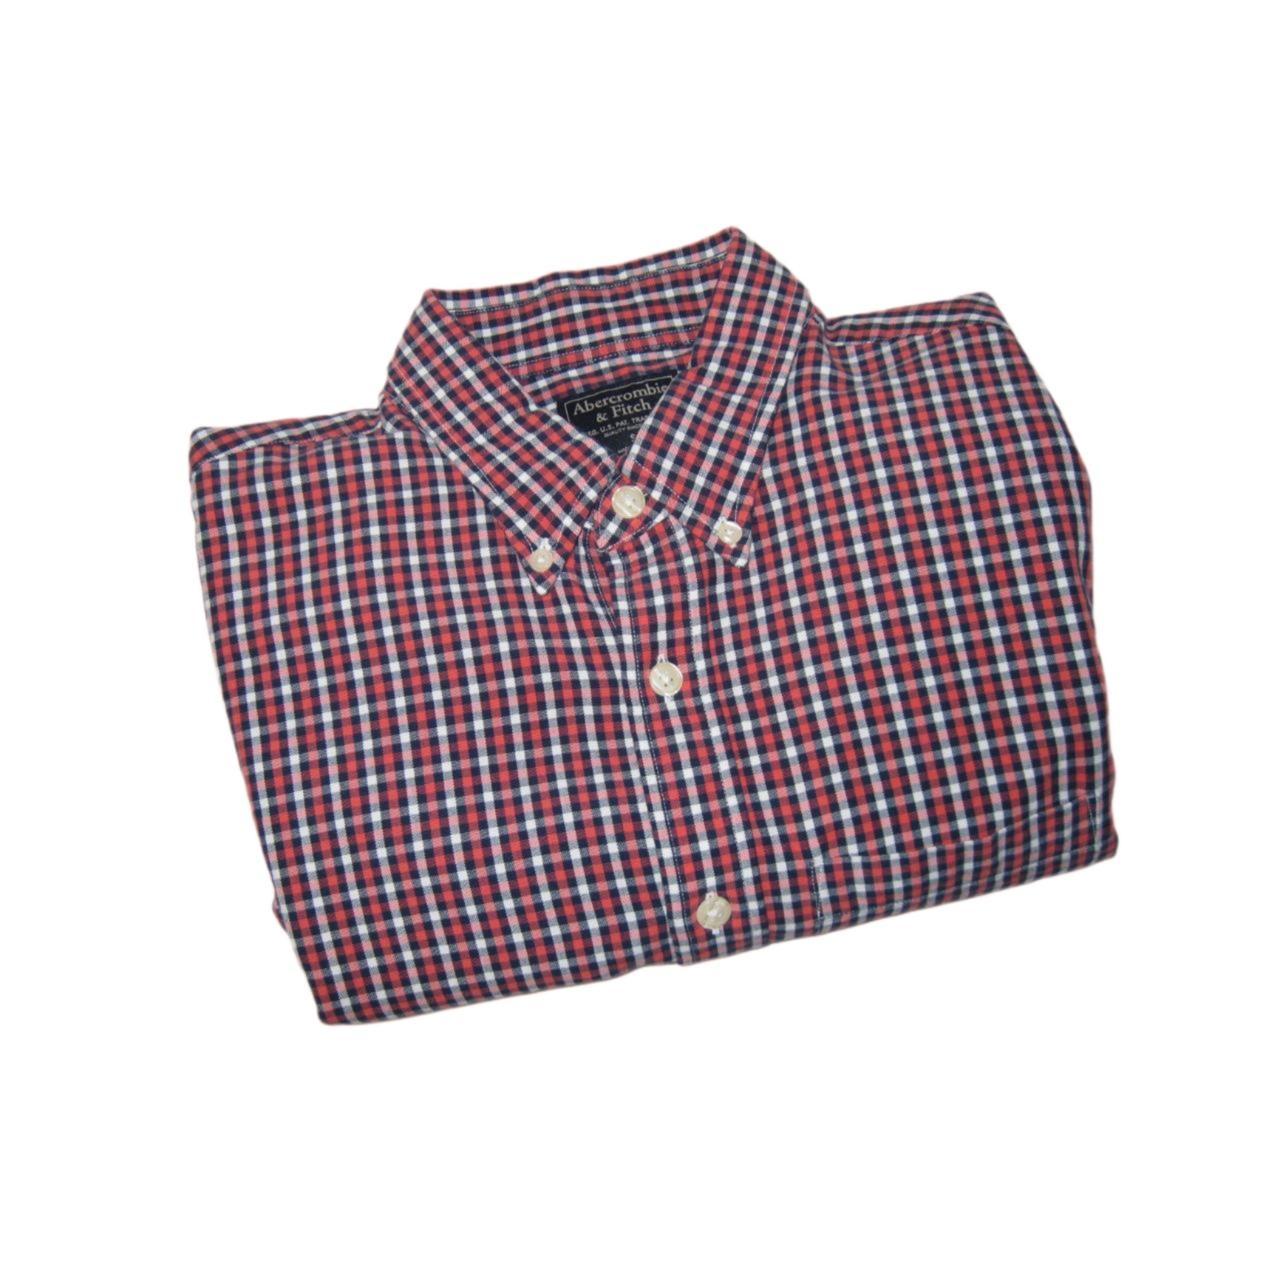 Abercrombie & Fitch Button-Up Shirt (w Tags) Men’s -Small